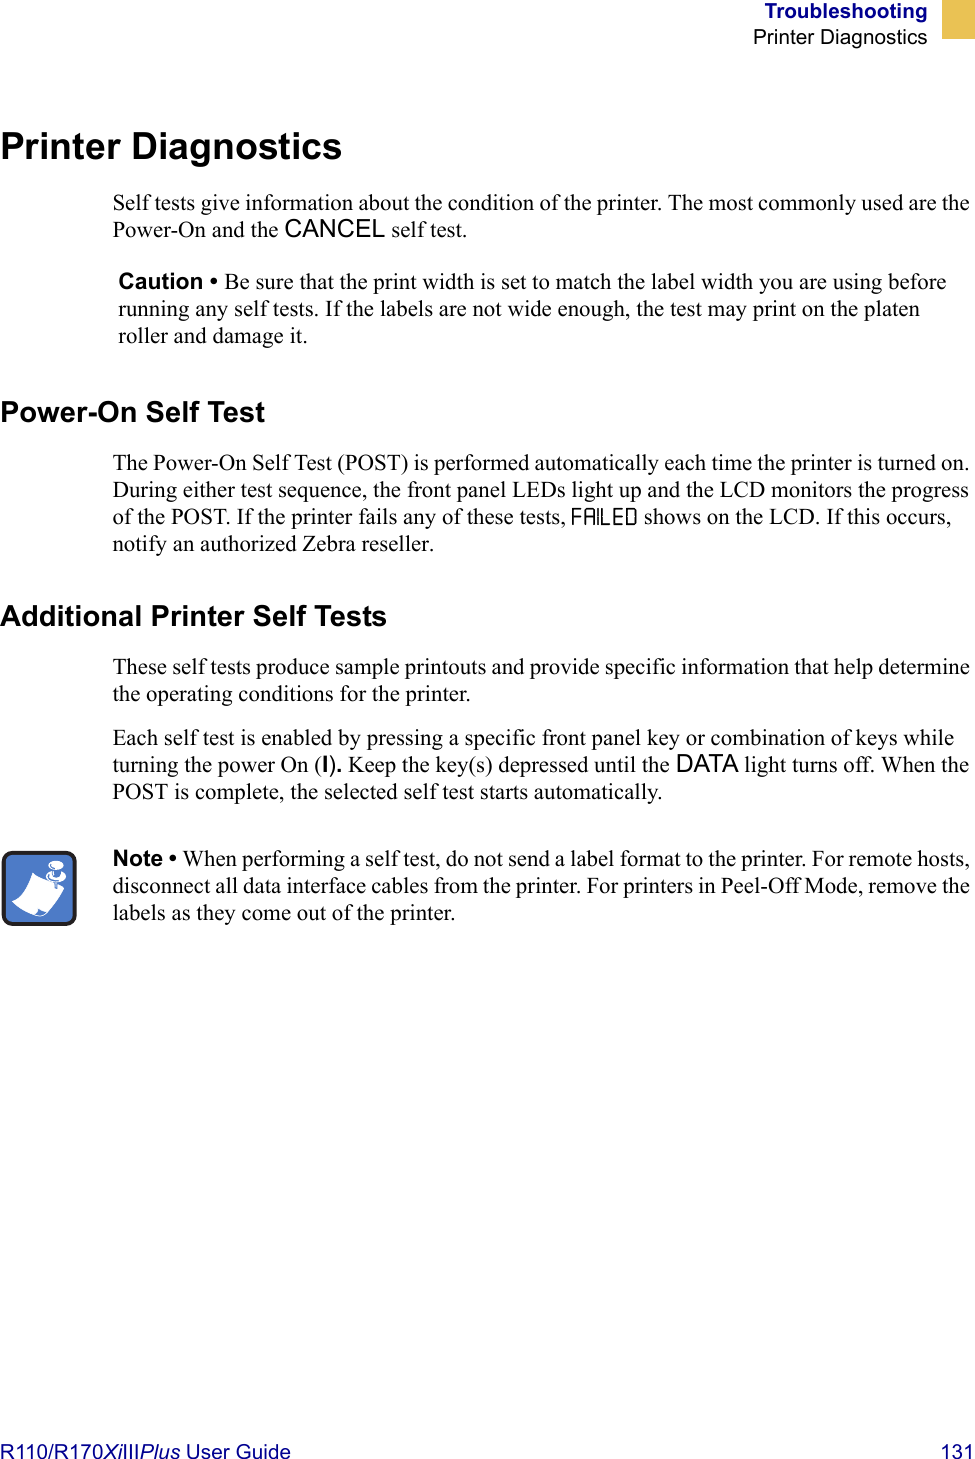 TroubleshootingPrinter DiagnosticsR110/R170XiIIIPlus User Guide  131Printer DiagnosticsSelf tests give information about the condition of the printer. The most commonly used are the Power-On and the CANCEL self test.Power-On Self TestThe Power-On Self Test (POST) is performed automatically each time the printer is turned on. During either test sequence, the front panel LEDs light up and the LCD monitors the progress of the POST. If the printer fails any of these tests, FAILED shows on the LCD. If this occurs, notify an authorized Zebra reseller.Additional Printer Self TestsThese self tests produce sample printouts and provide specific information that help determine the operating conditions for the printer.Each self test is enabled by pressing a specific front panel key or combination of keys while turning the power On (I). Keep the key(s) depressed until the DATA light turns off. When the POST is complete, the selected self test starts automatically.Caution • Be sure that the print width is set to match the label width you are using before running any self tests. If the labels are not wide enough, the test may print on the platen roller and damage it.Note • When performing a self test, do not send a label format to the printer. For remote hosts, disconnect all data interface cables from the printer. For printers in Peel-Off Mode, remove the labels as they come out of the printer.